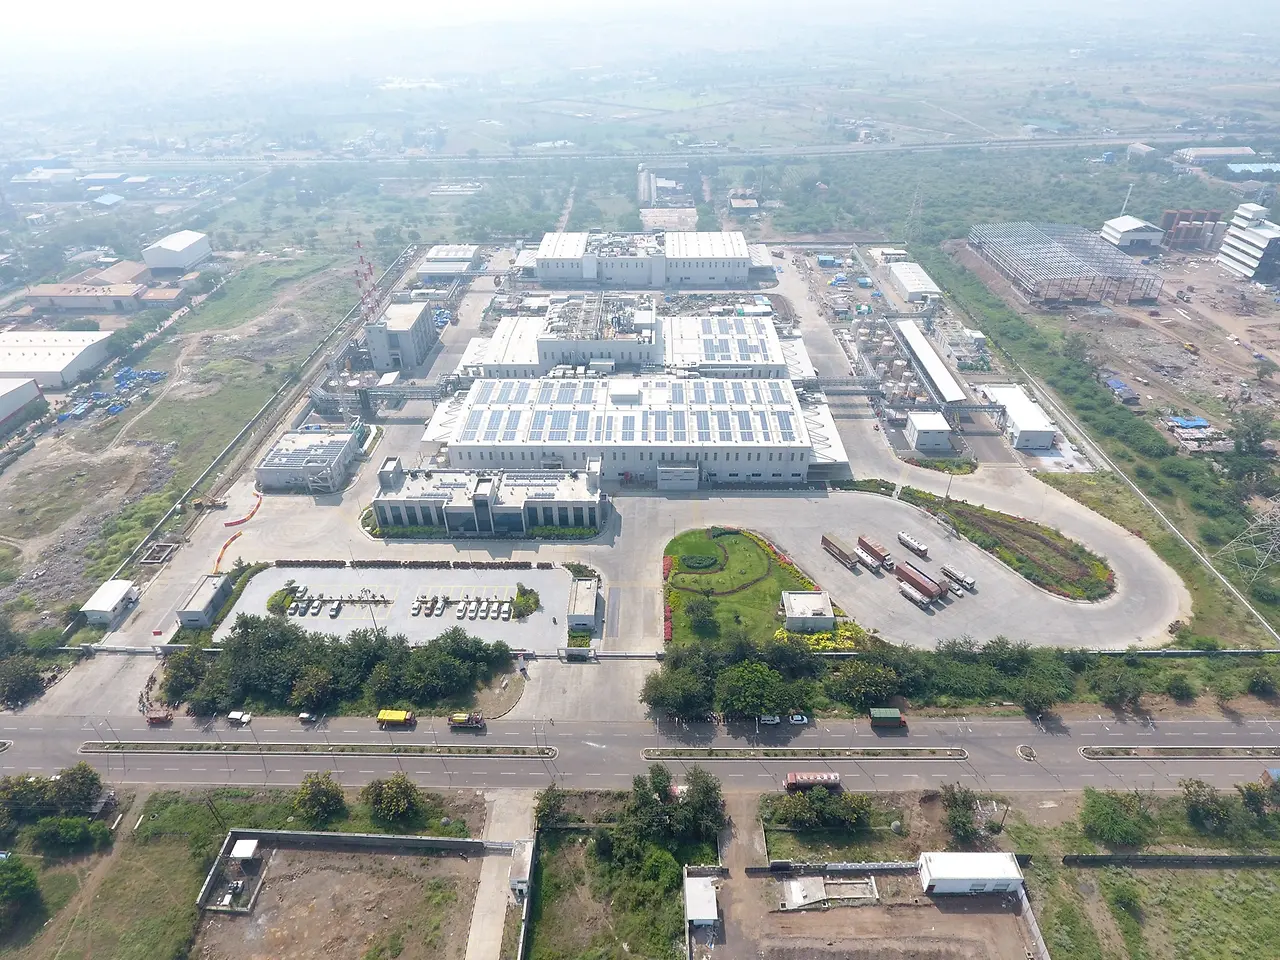 With the opening of its new plant in Kurkumbh Henkel is expanding its capabilities for high-impact solutions in India.